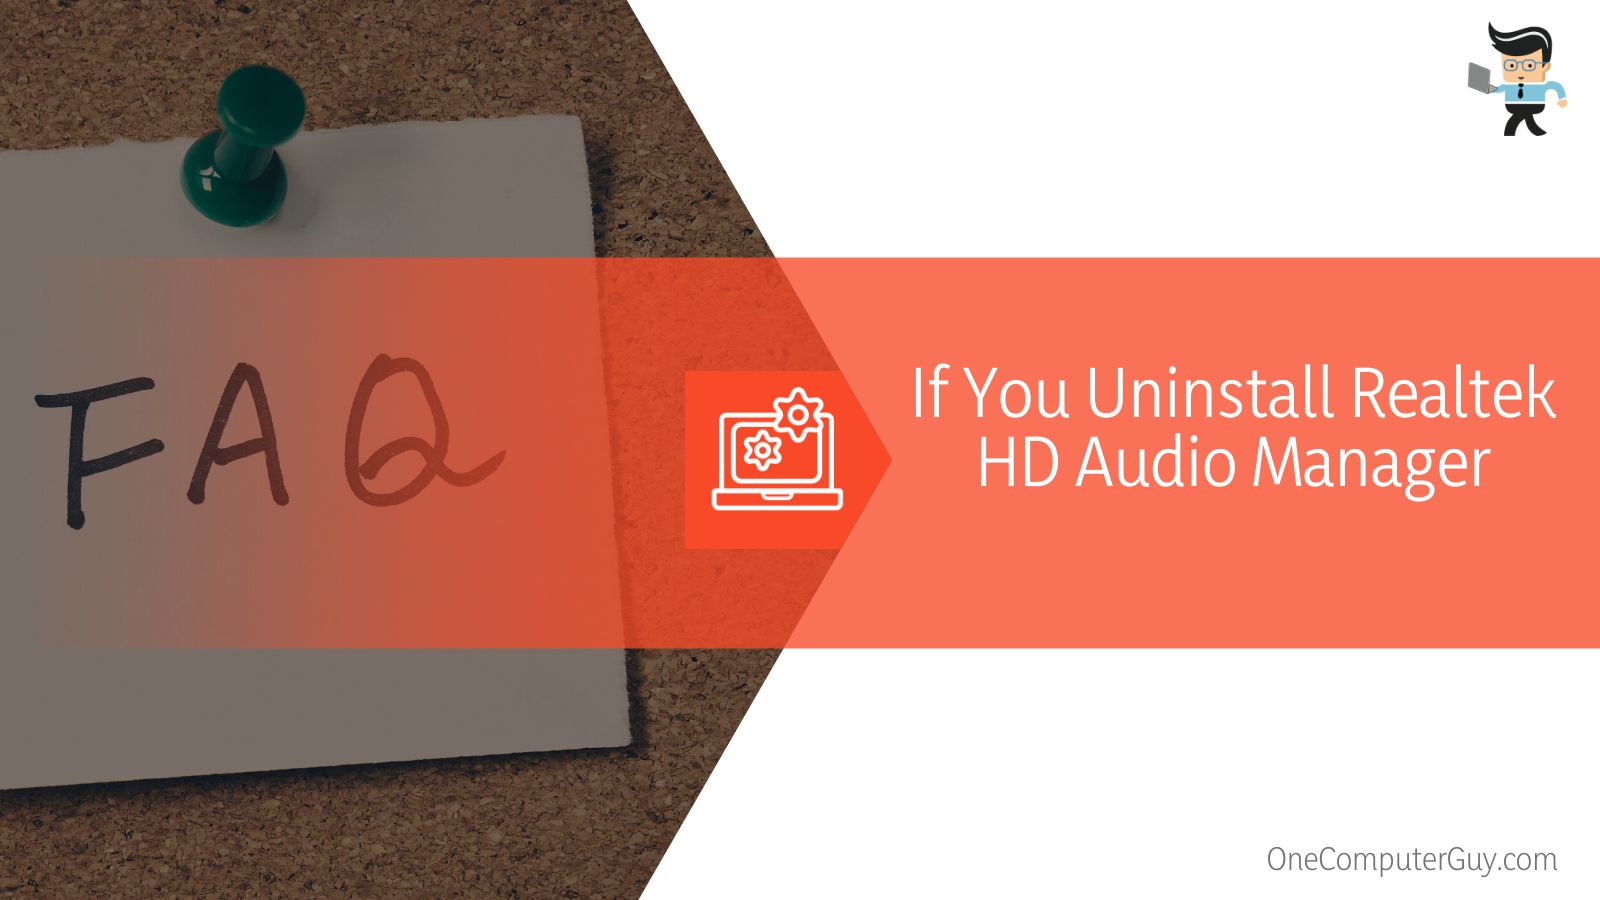 If You Uninstall Realtek HD Audio Manager